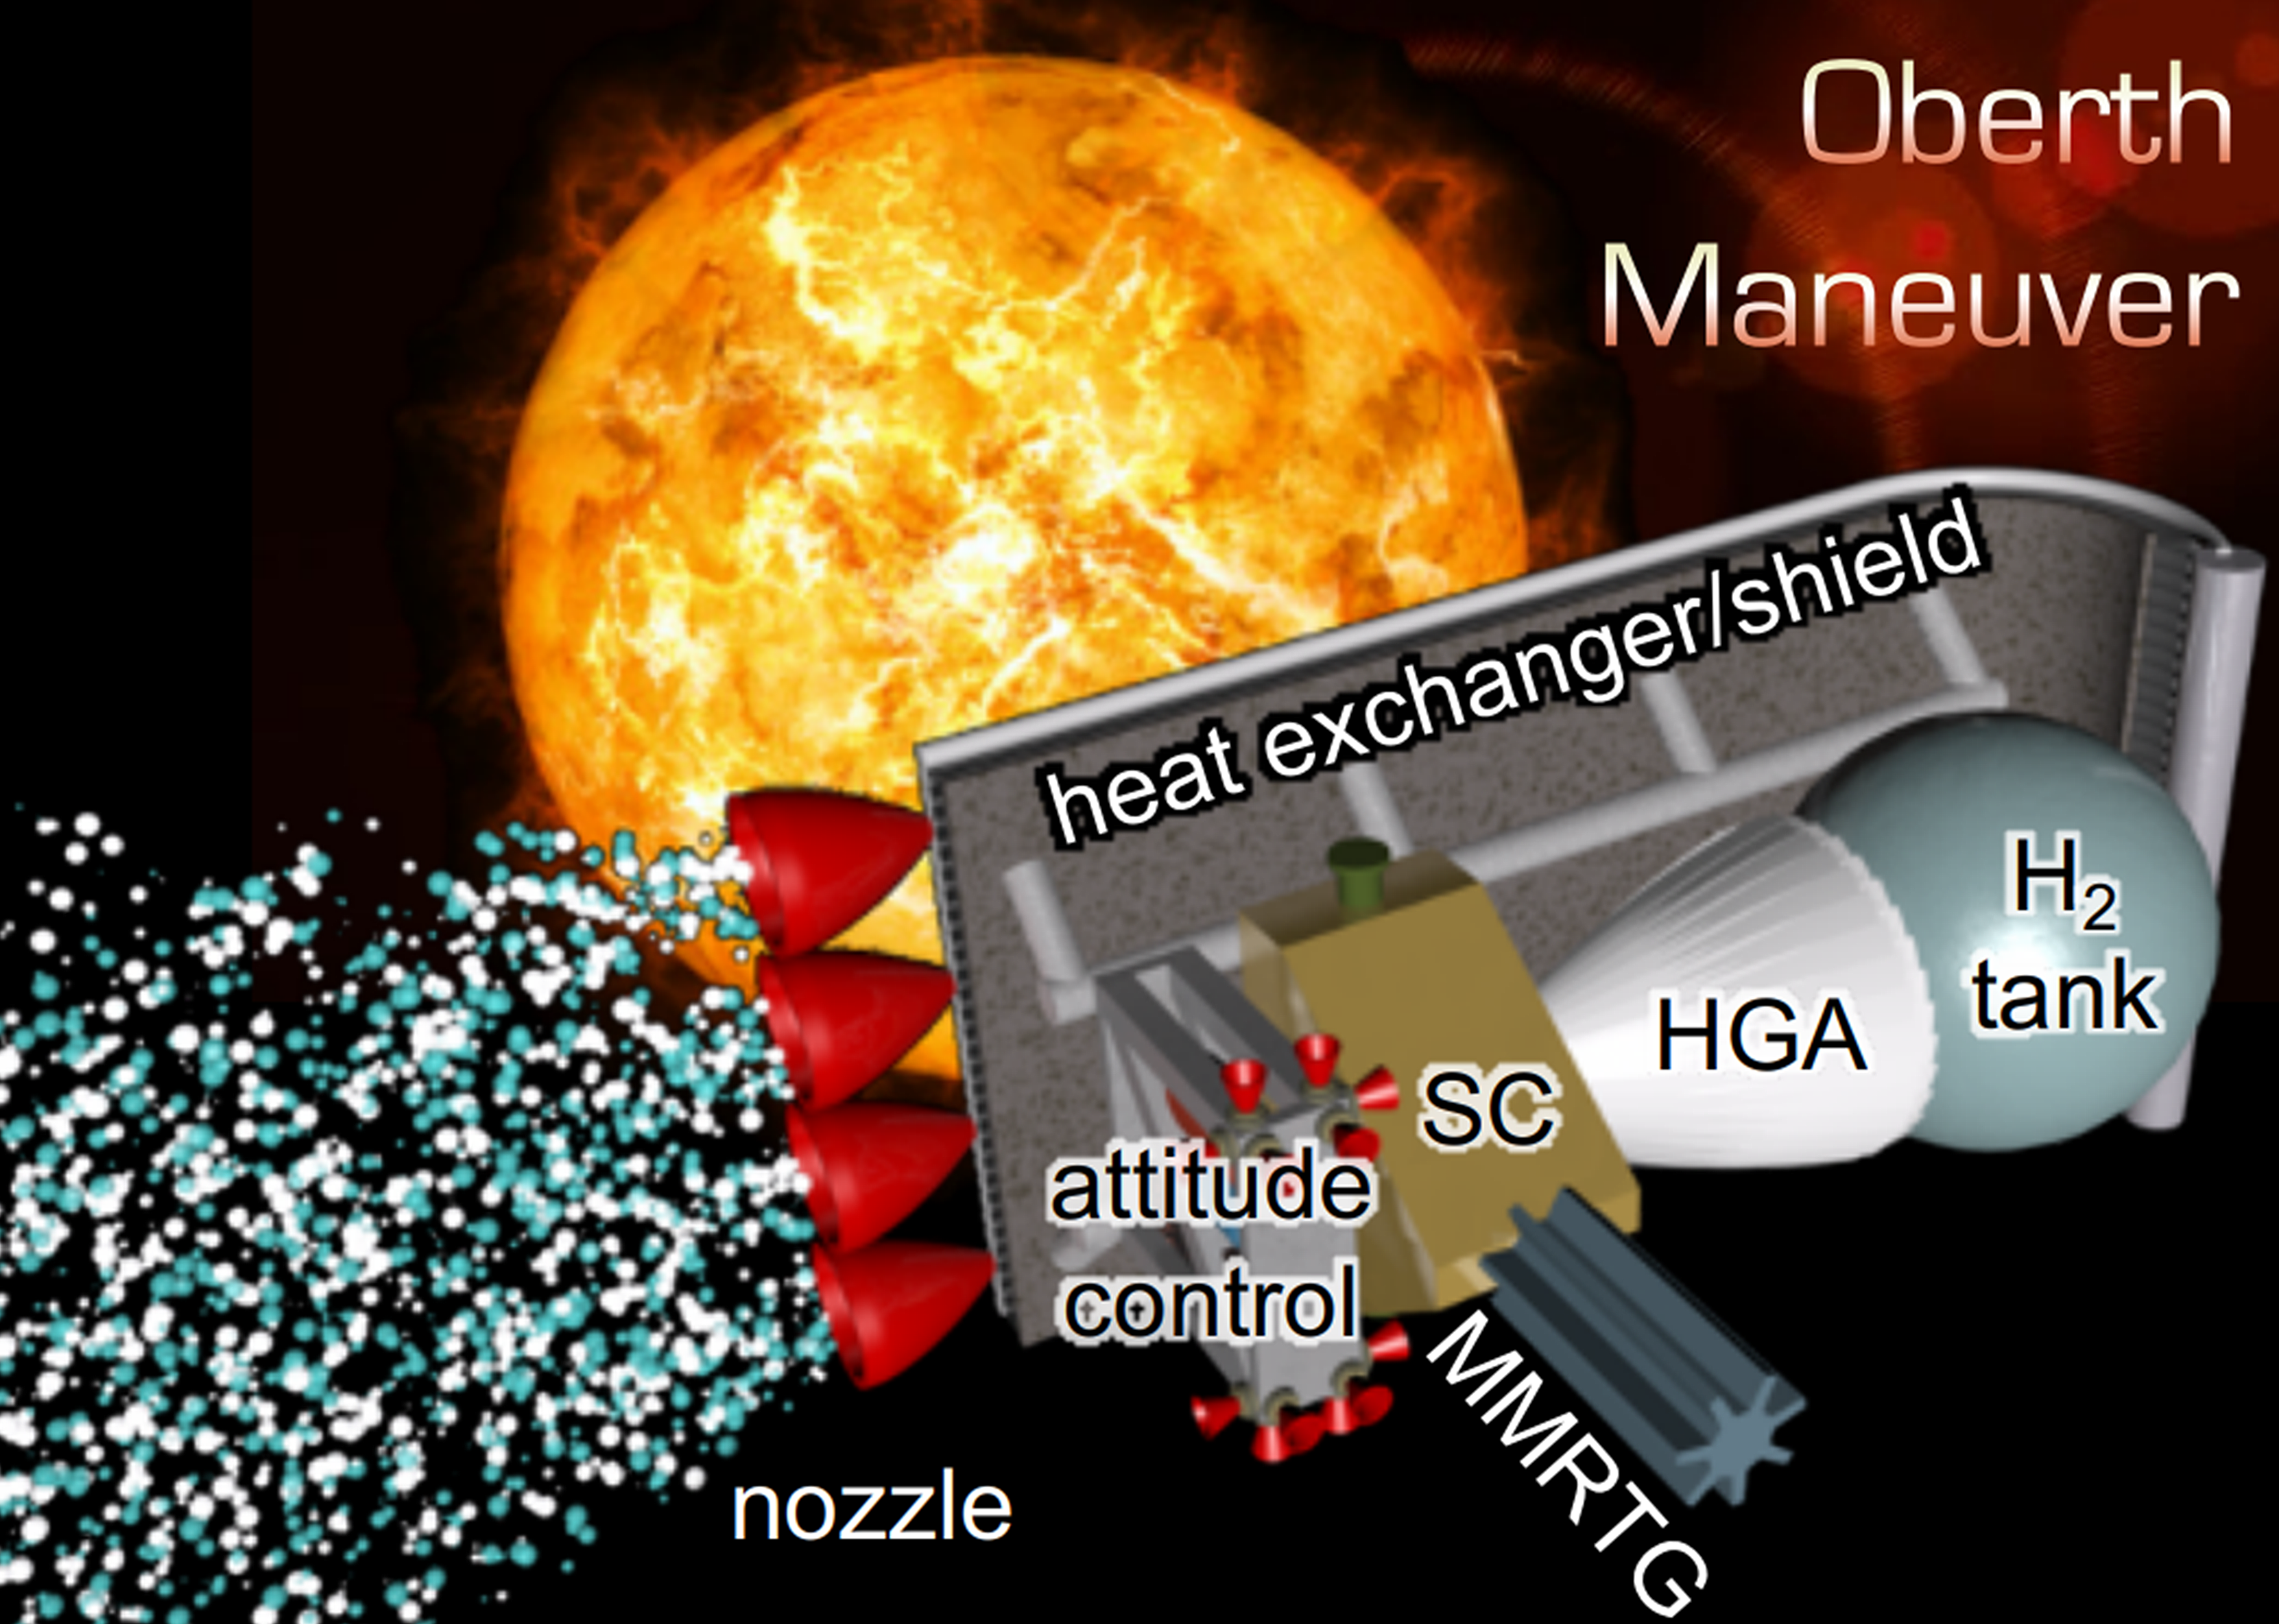 Combined Heat Shield and Solar Thermal Propulsion System for an Oberth  Manuever - NASA